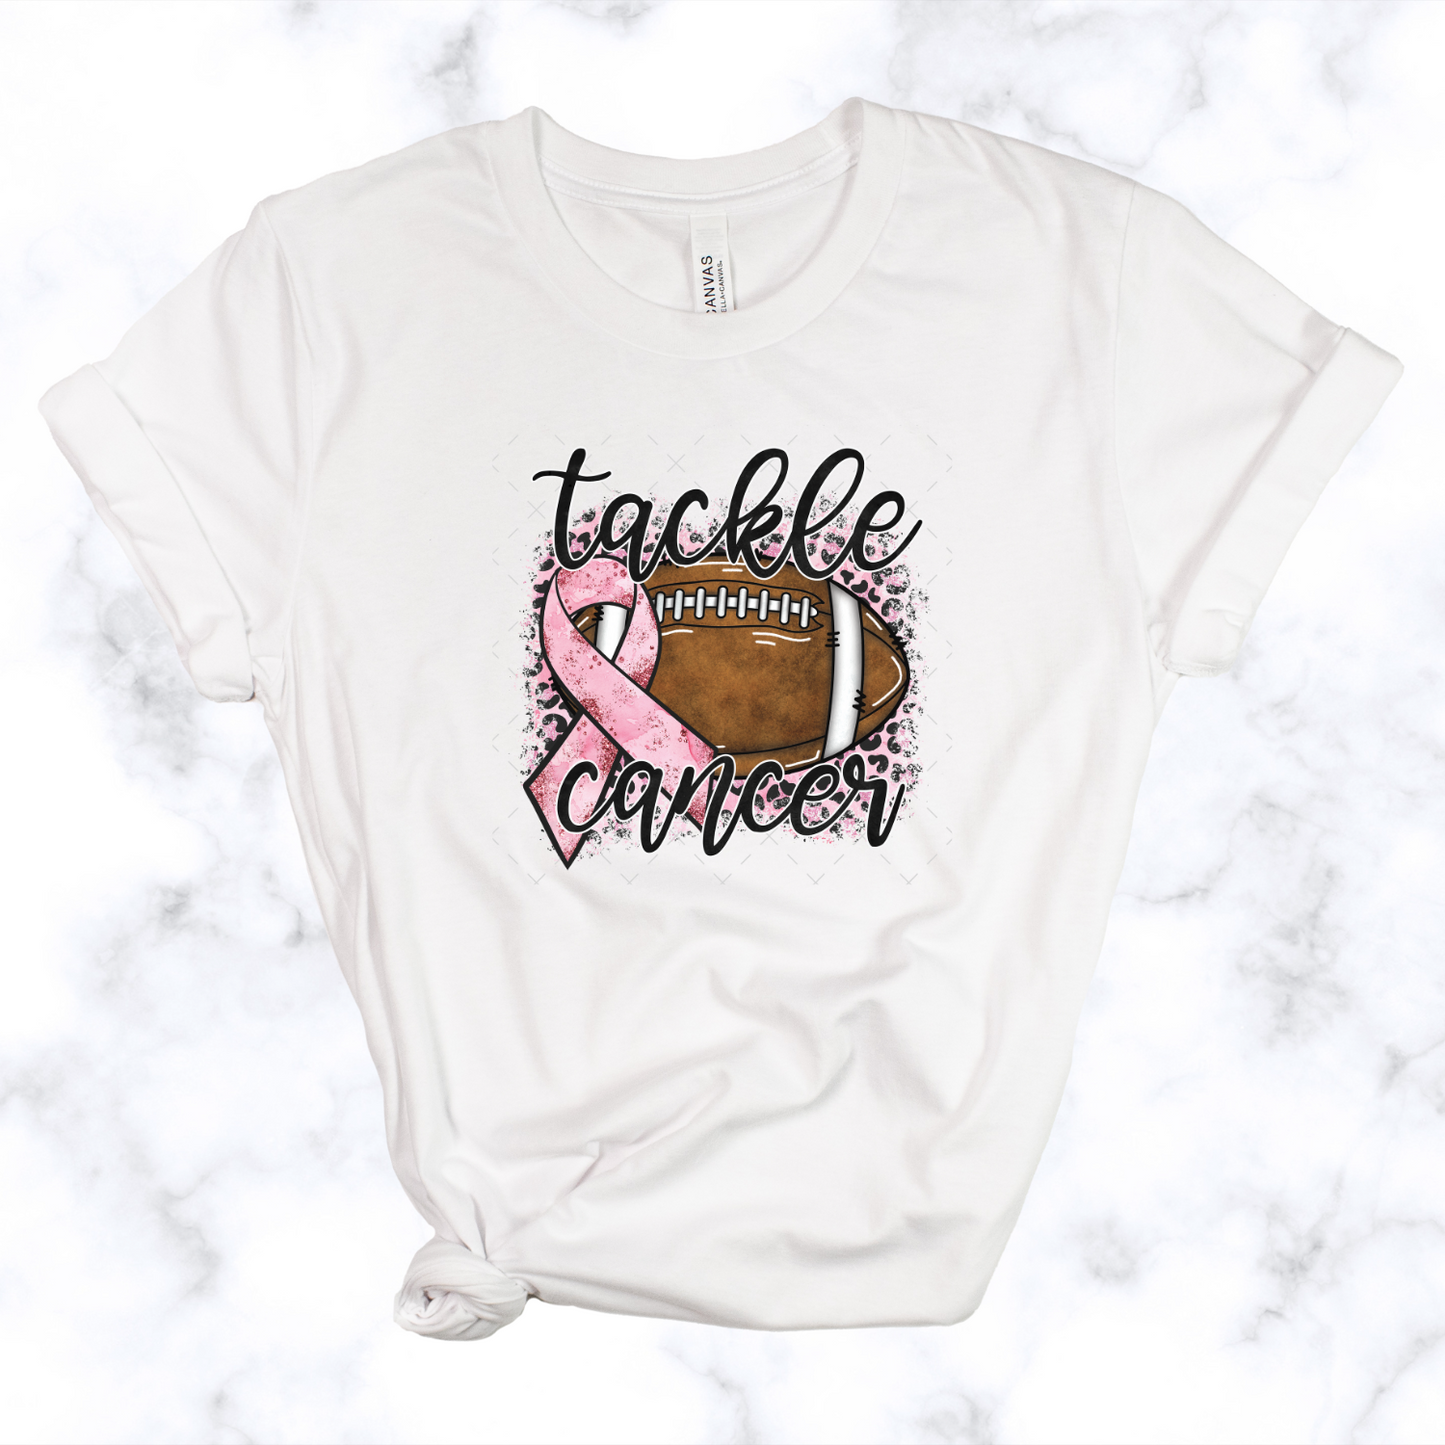 Tackle Cancer Tee Youth